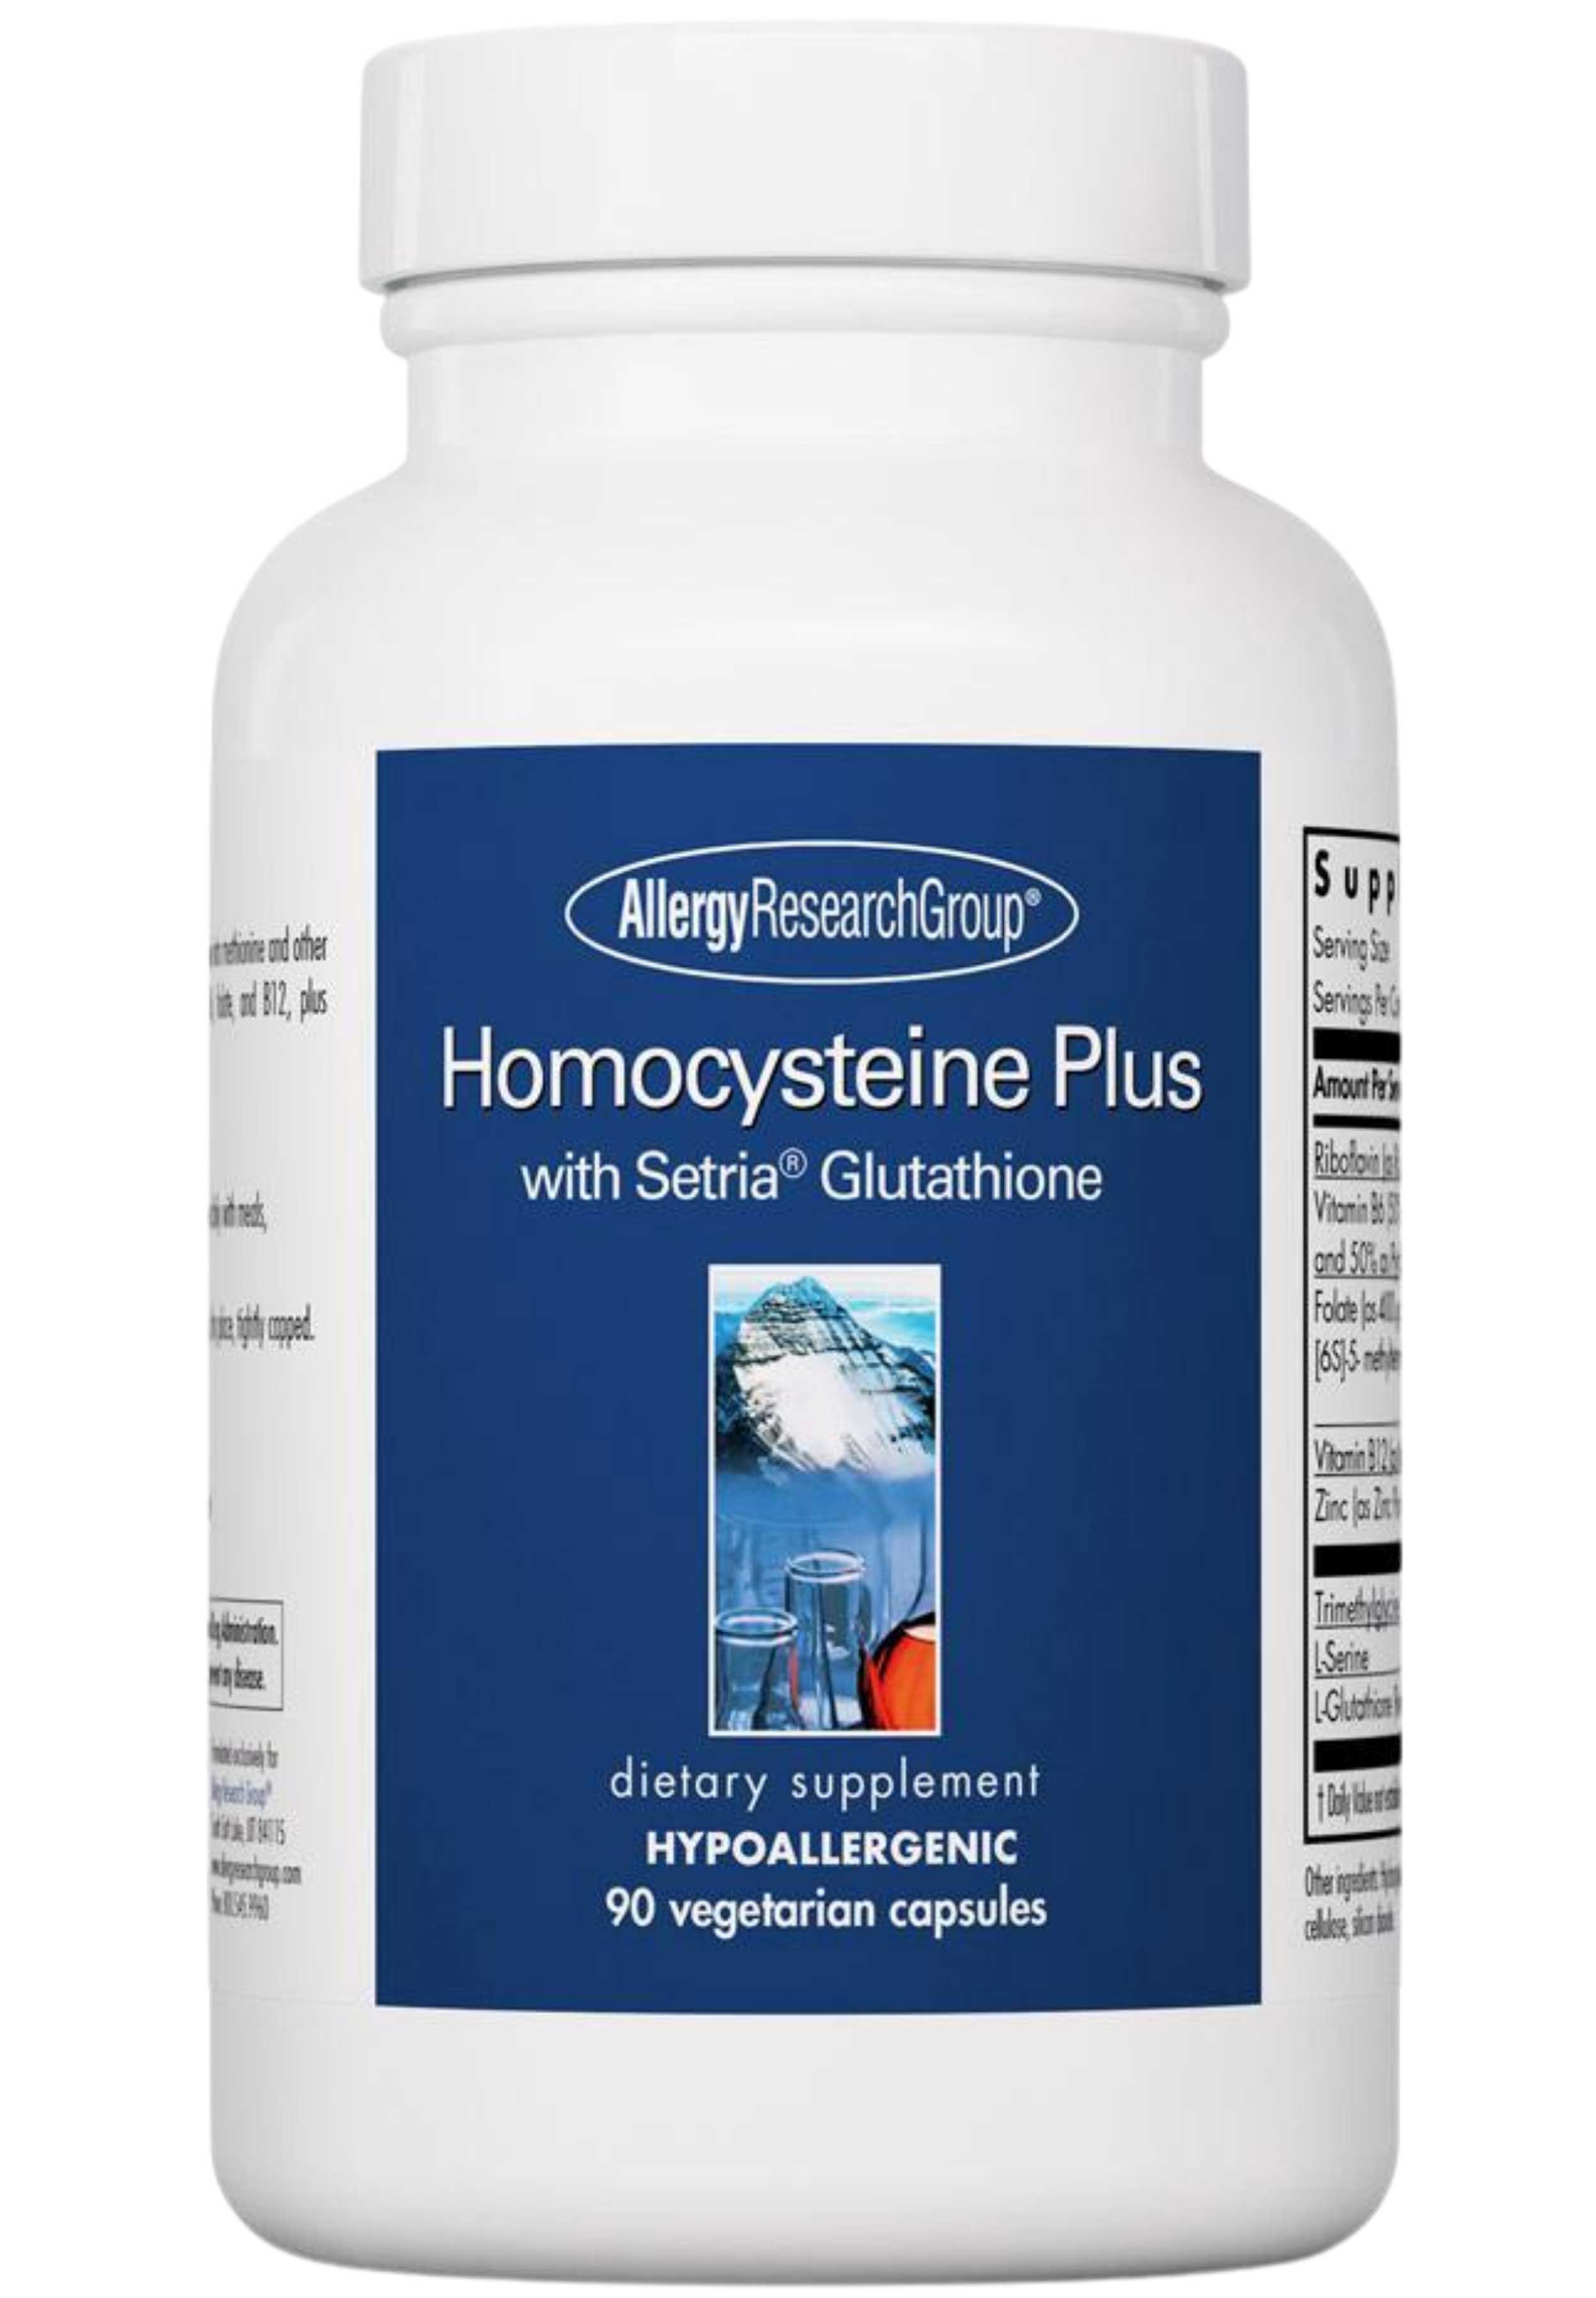 Allergy Research Group Homocysteine Plus